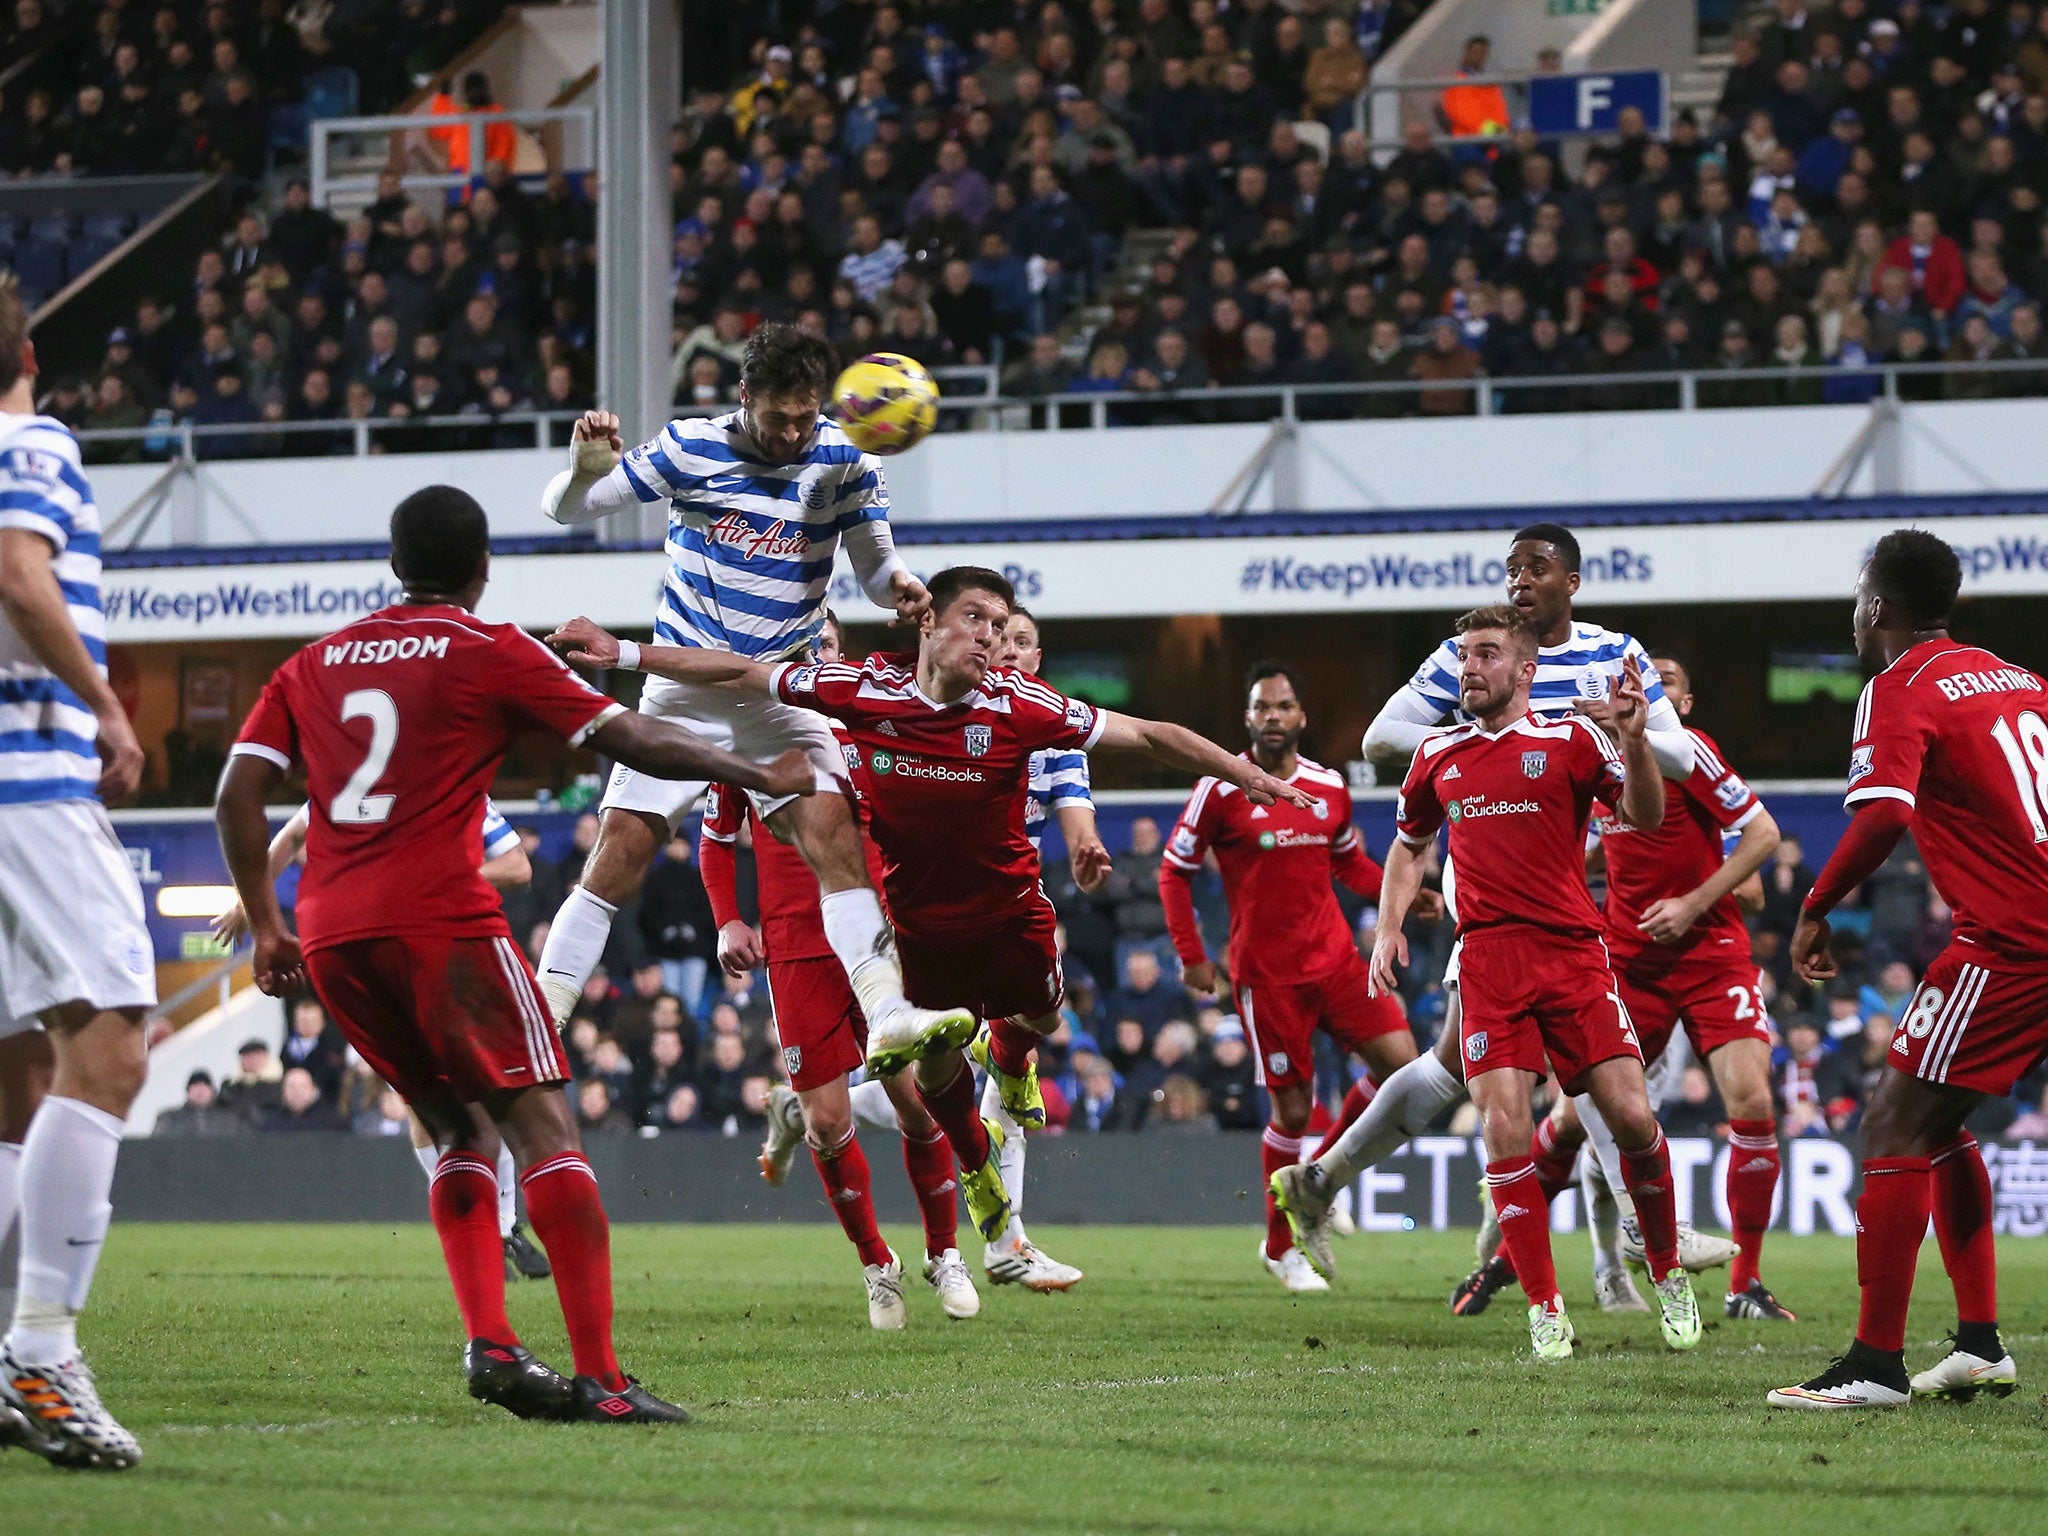 Charlie Austin heads in his third goal to win the game for QPR